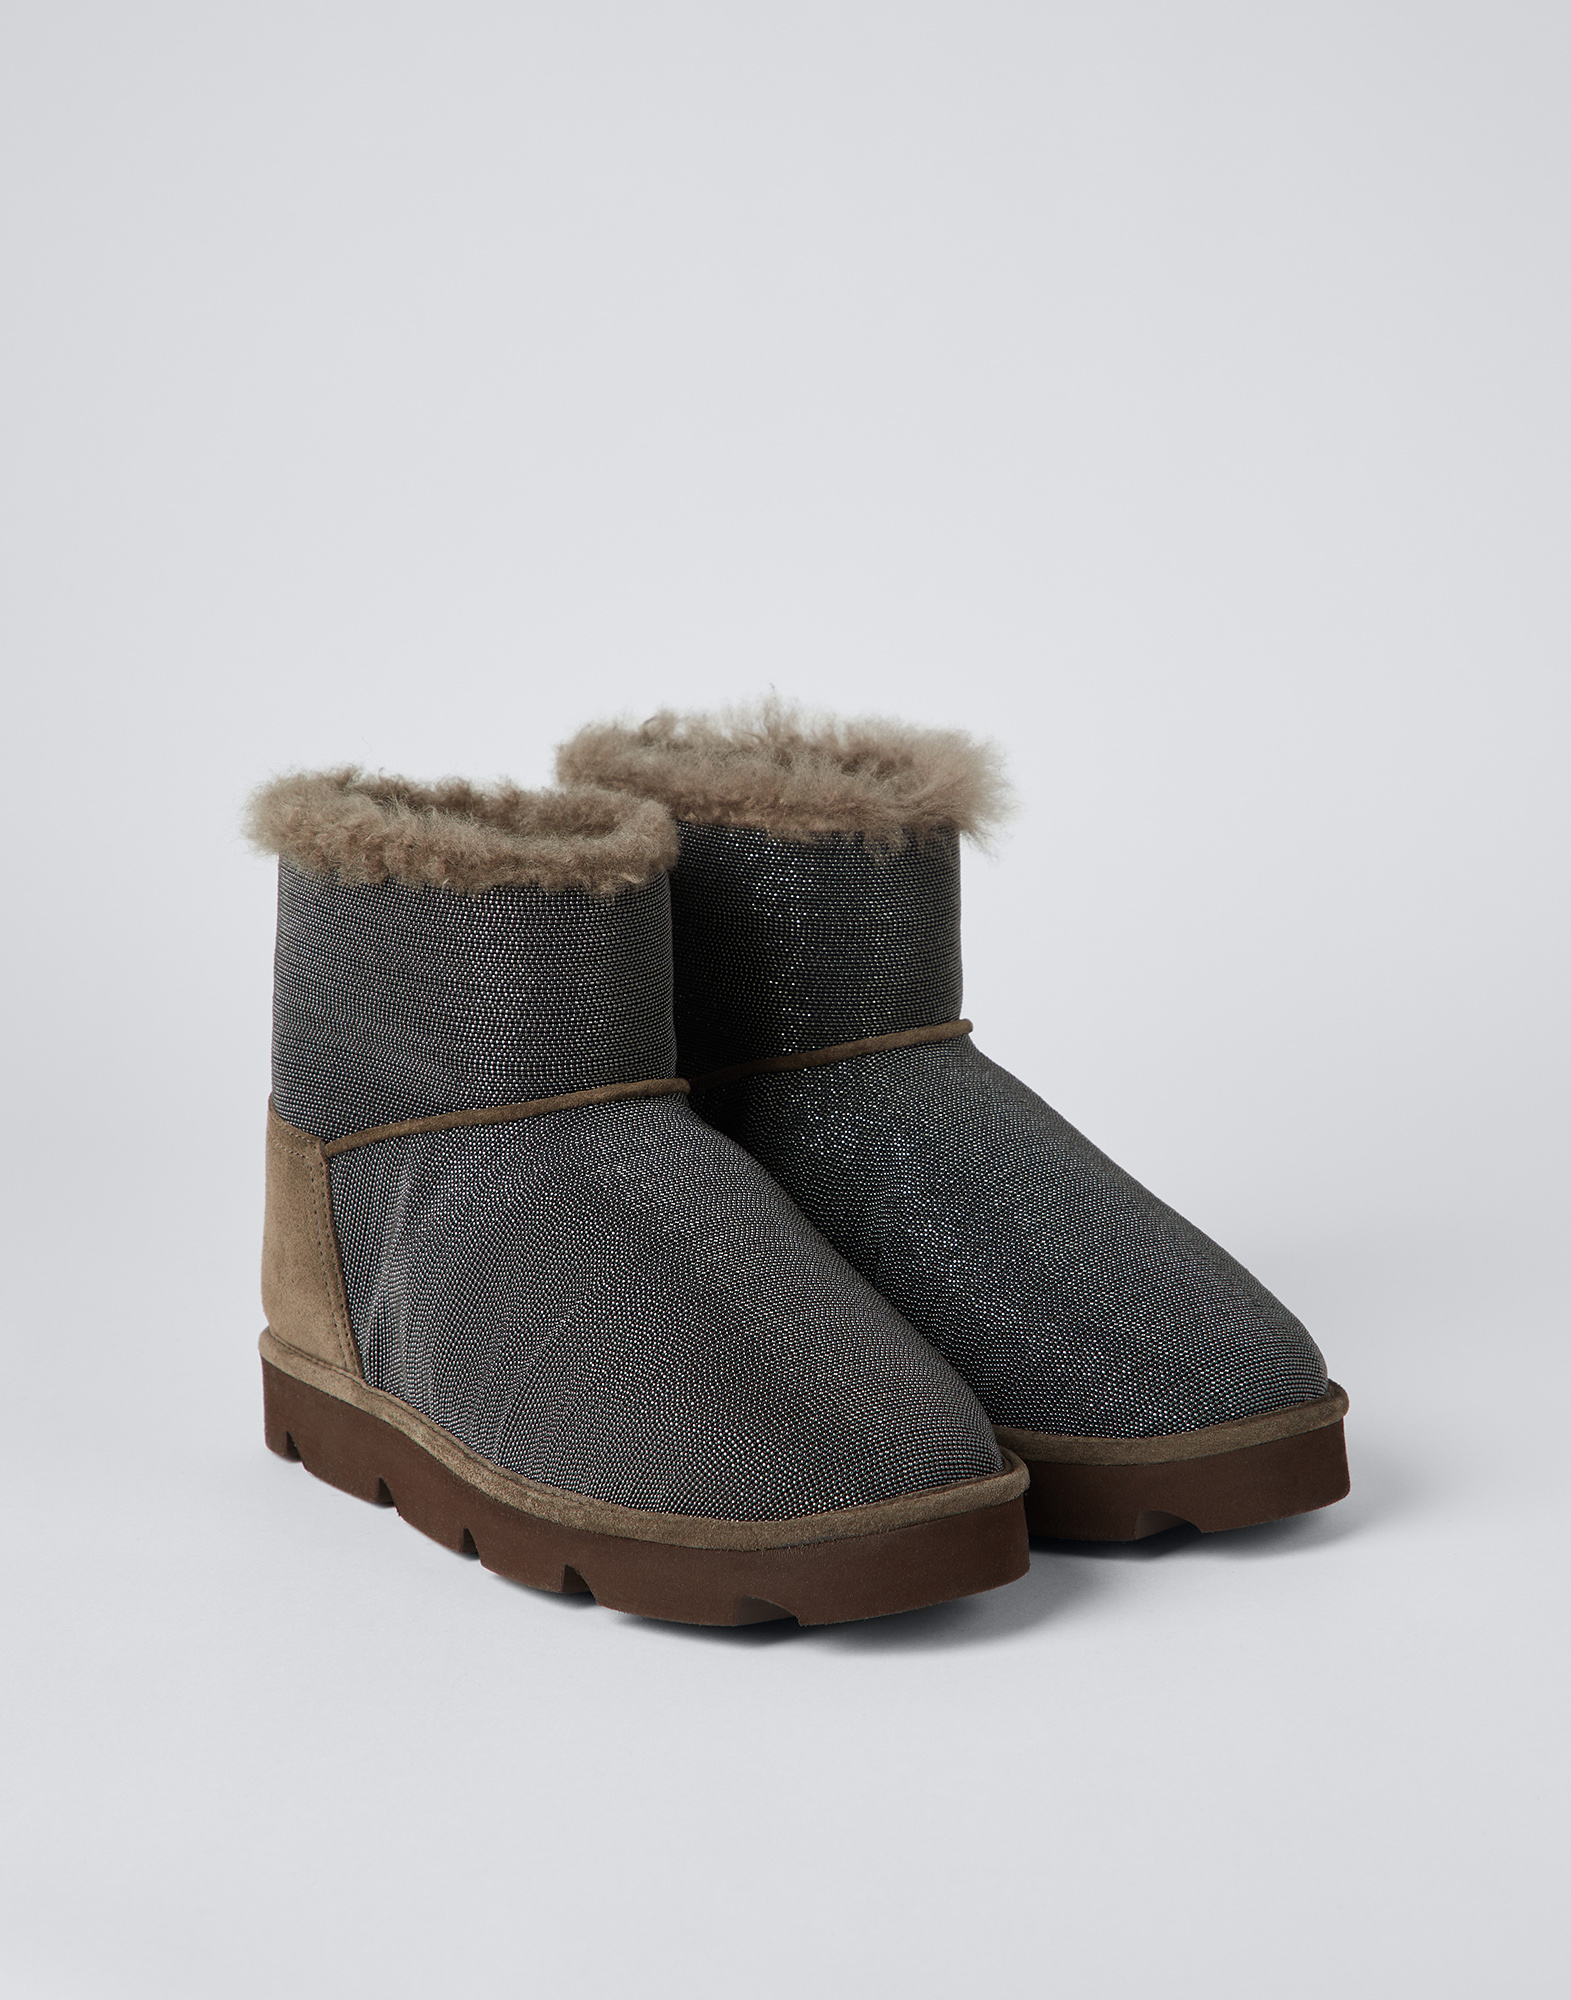 Boots mit Futter aus Shearling